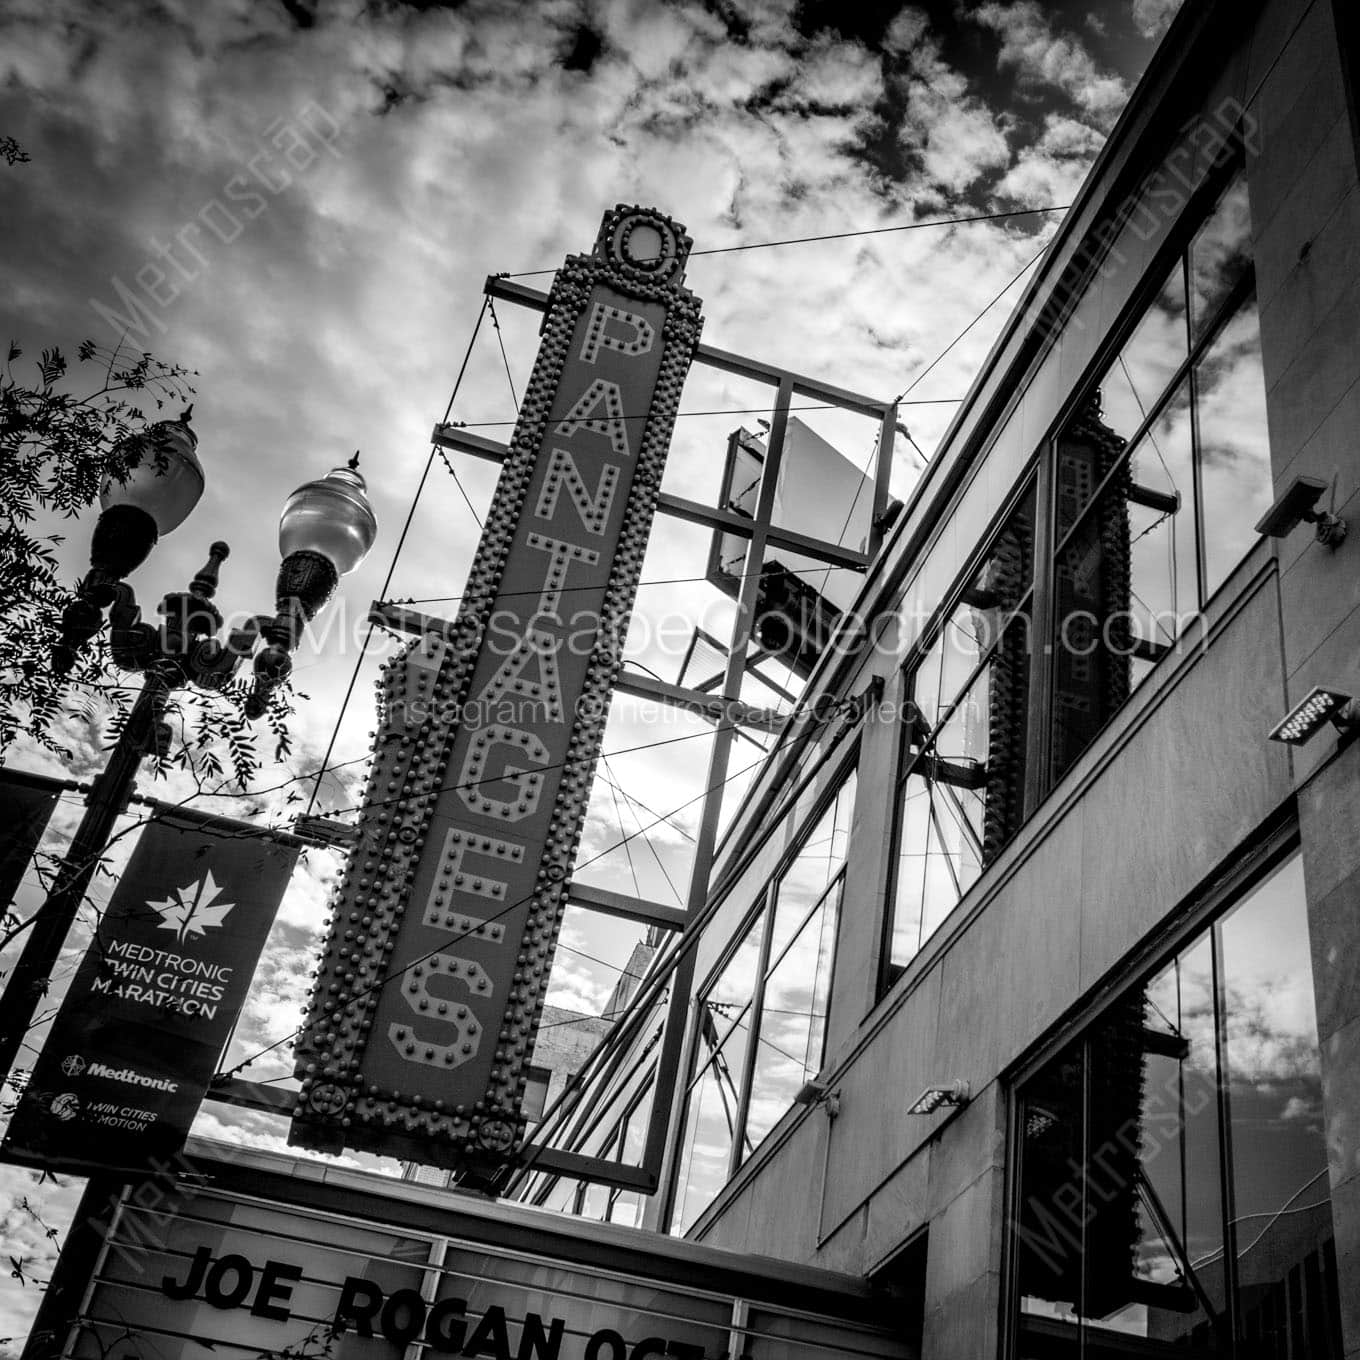 pantages theater sign Black & White Wall Art